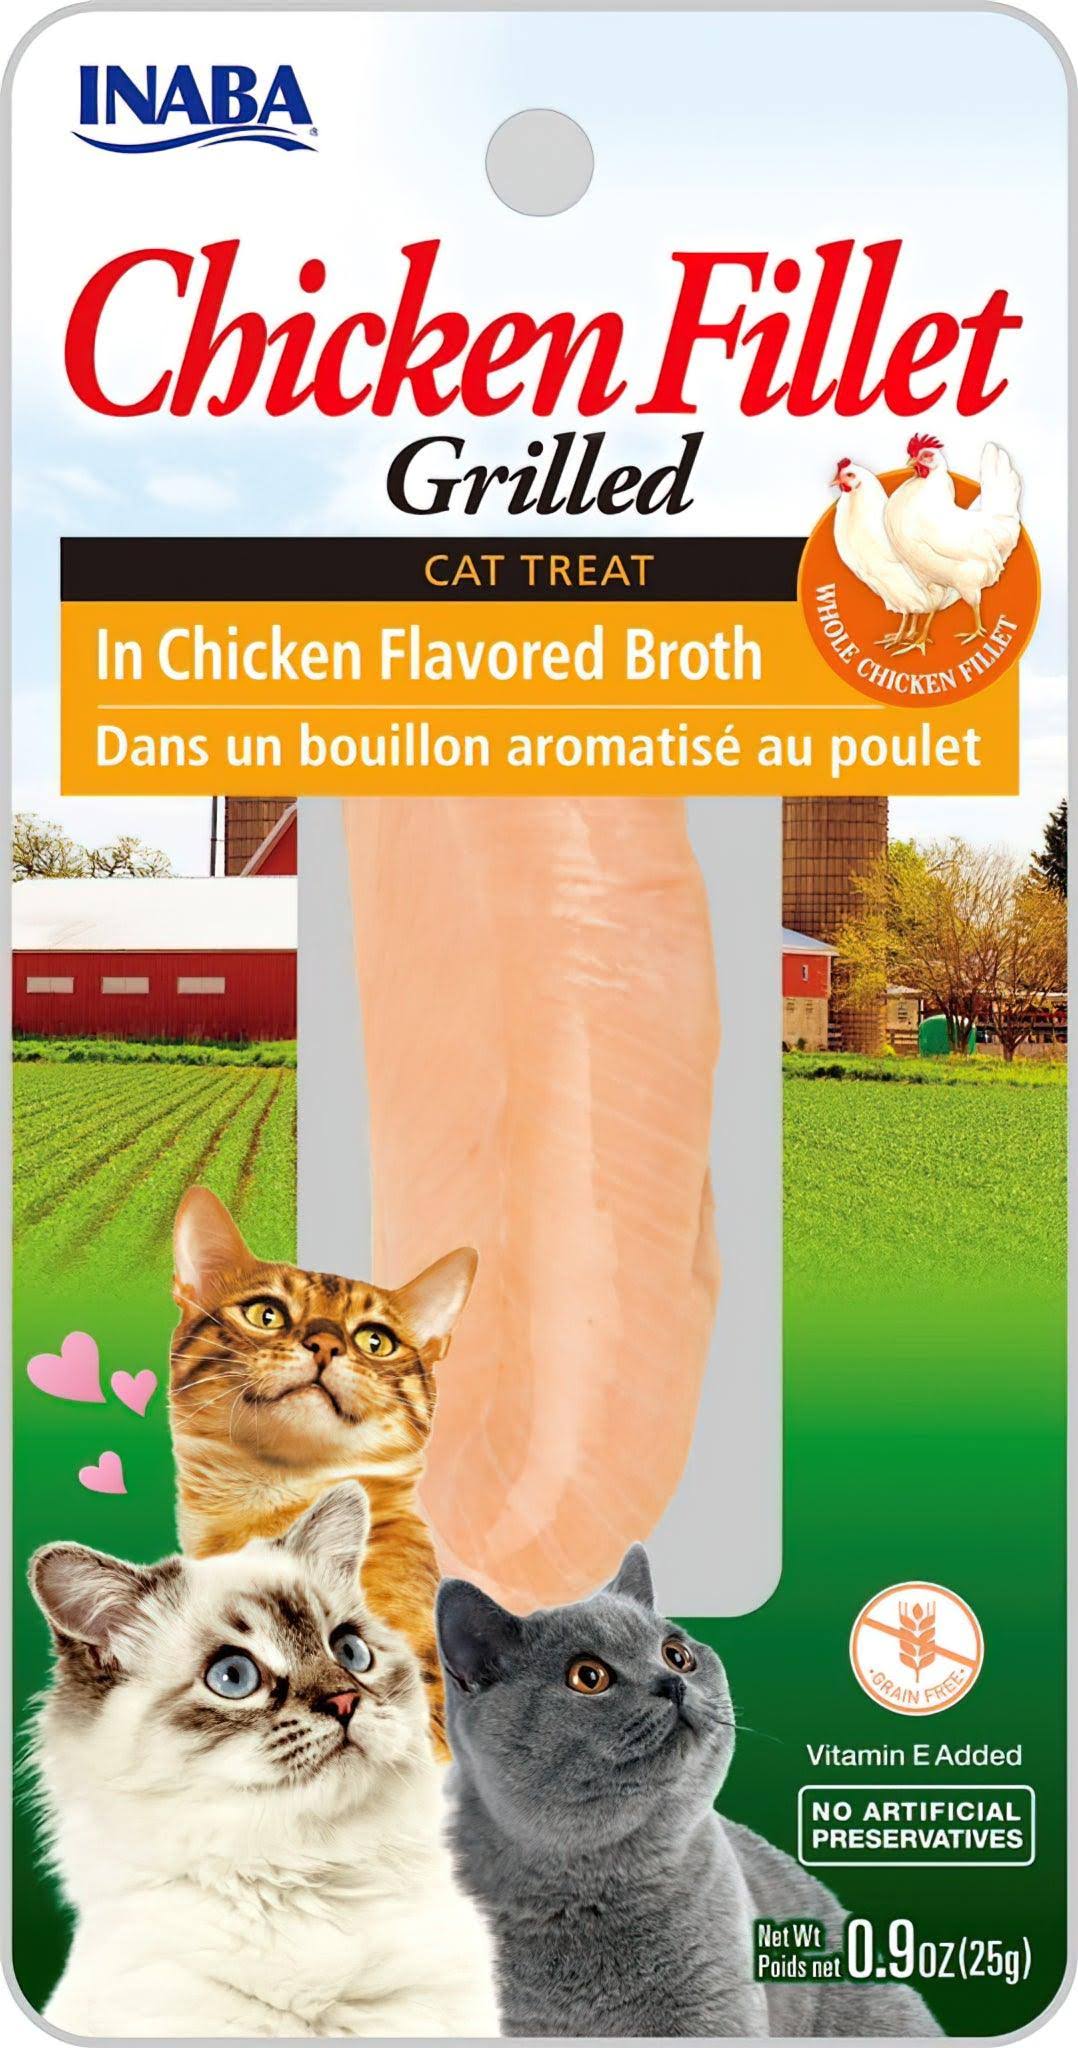 Inaba Grilled Chicken Fillet in Chicken Flavoured Broth Cat Treats